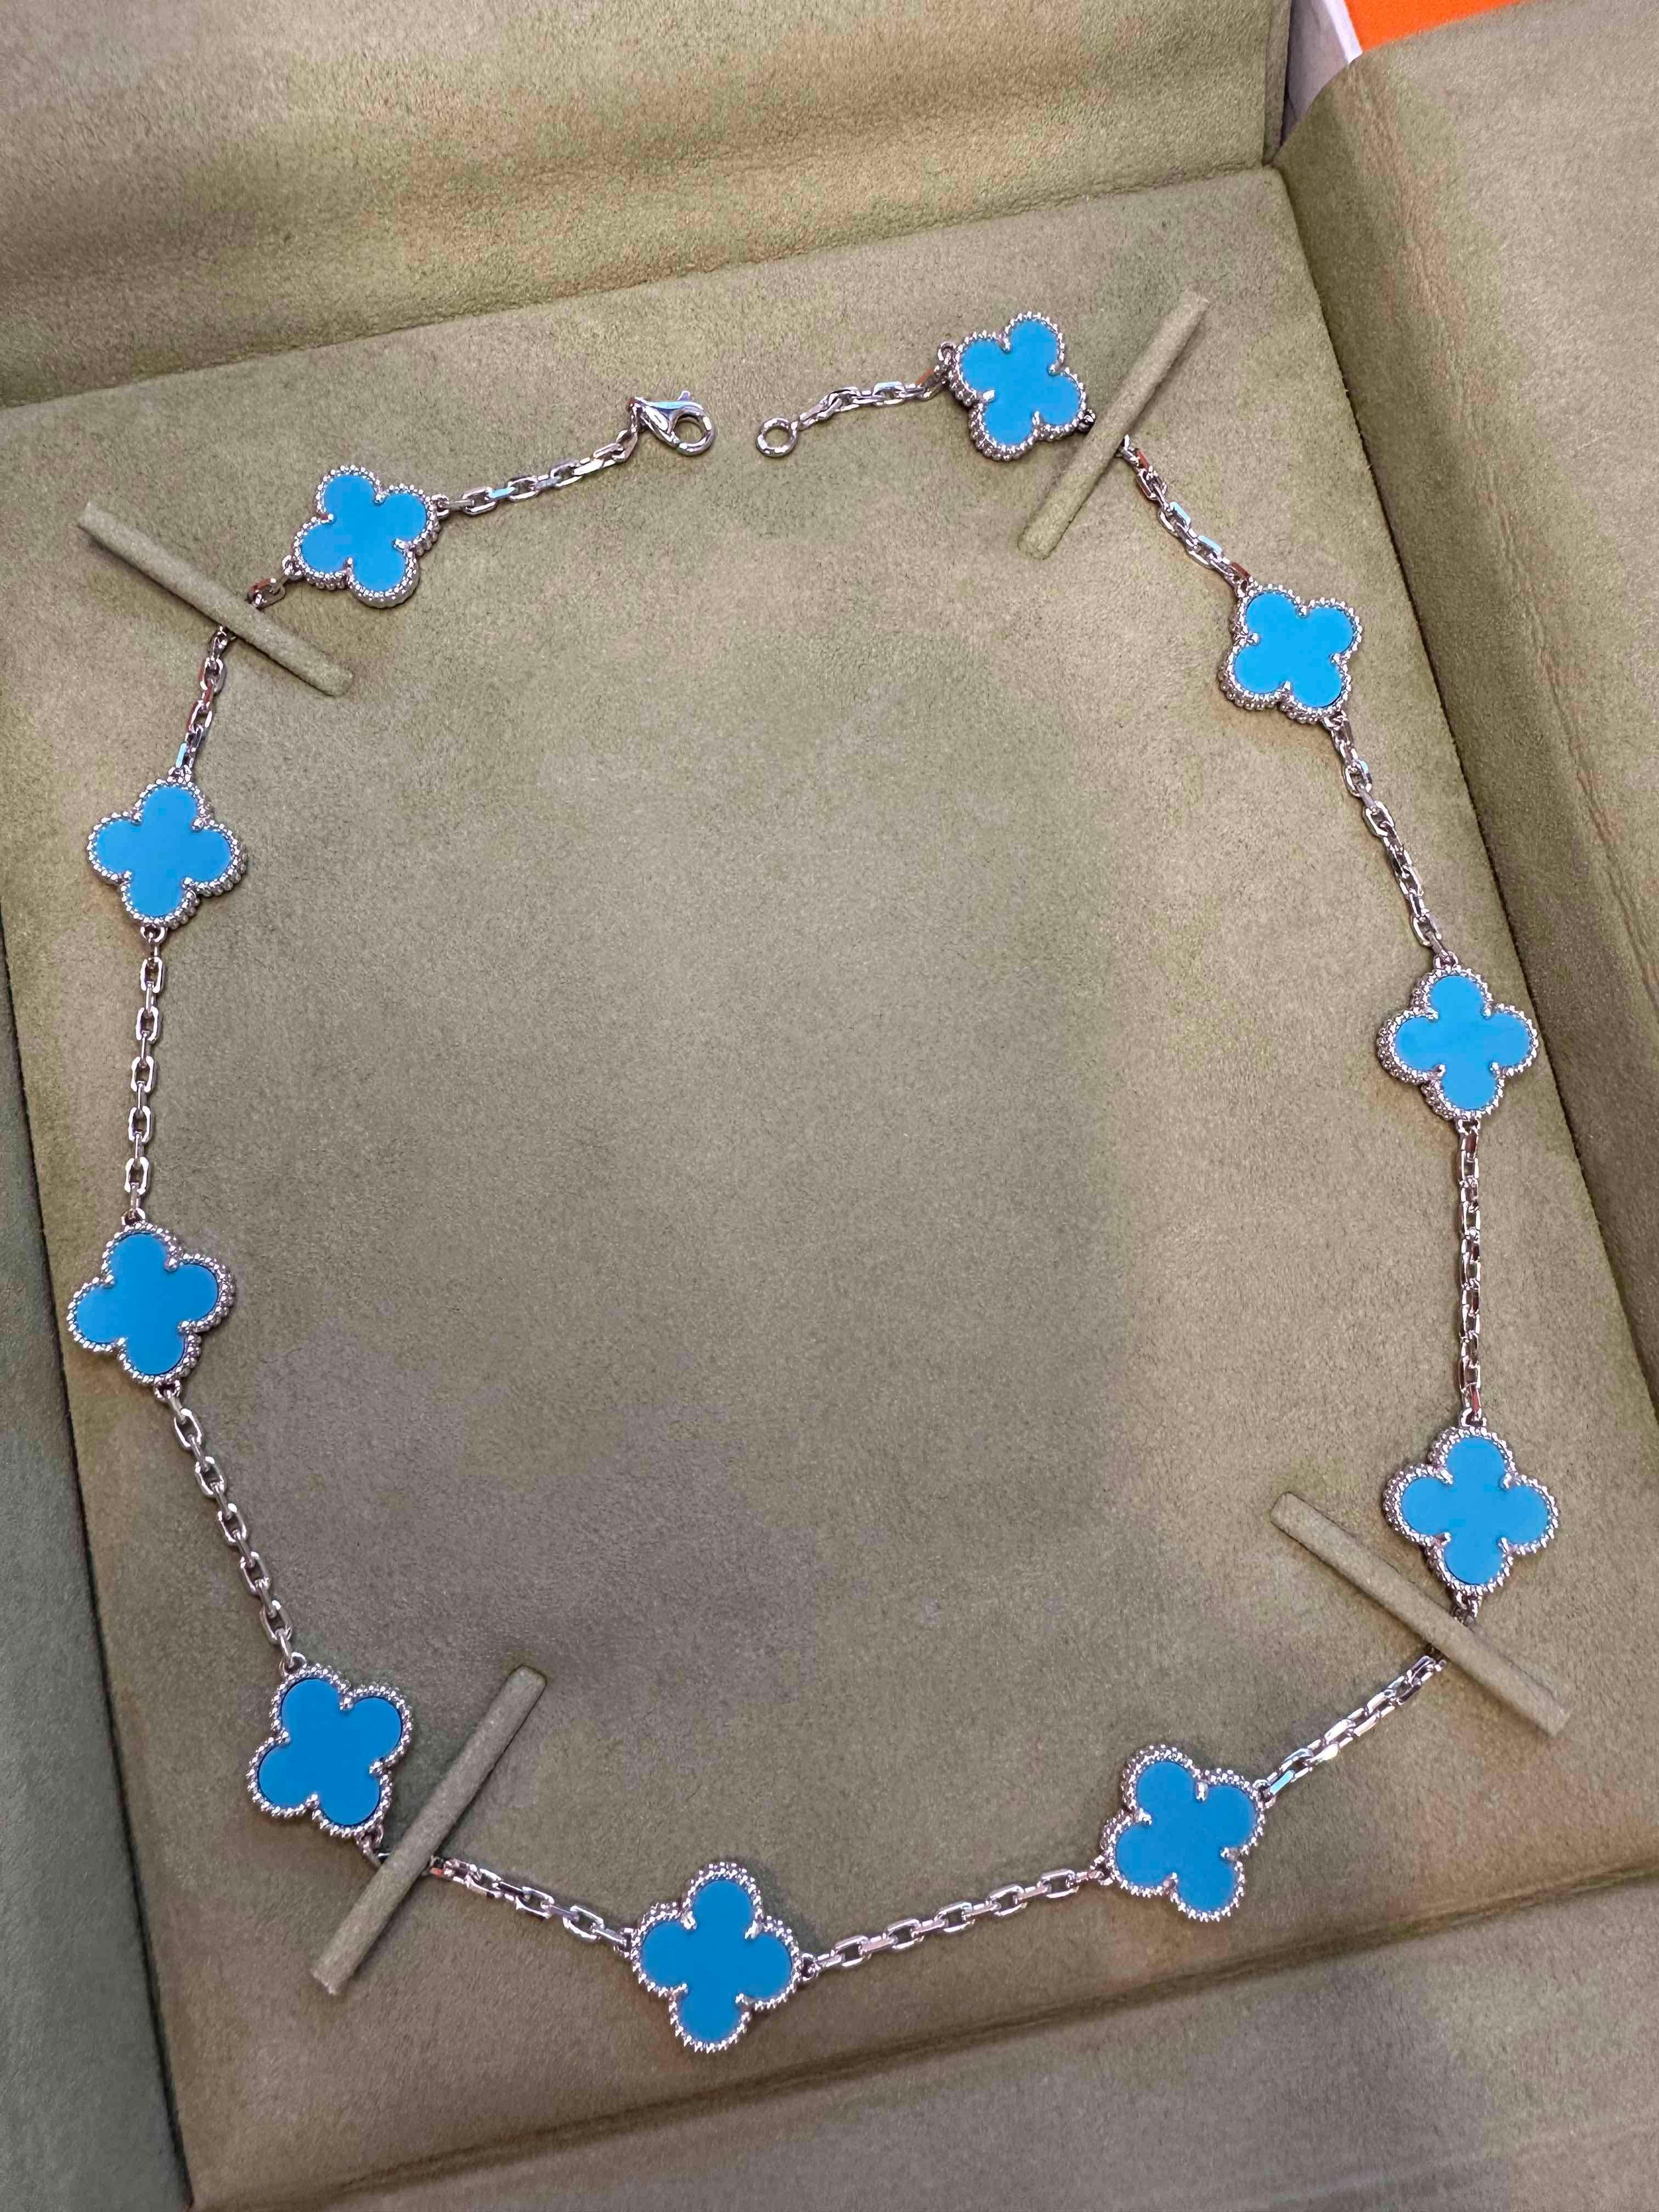 Van Cleef & Arpels chain necklace of 10 motifs Turquoise, white gold, Multiple ways of wearing as a necklace or a bracelet. Discontinued rare to find.

Maker: Van Cleef & Arpels

Accessories: Boxes and the necklace only. No certificate. The serial